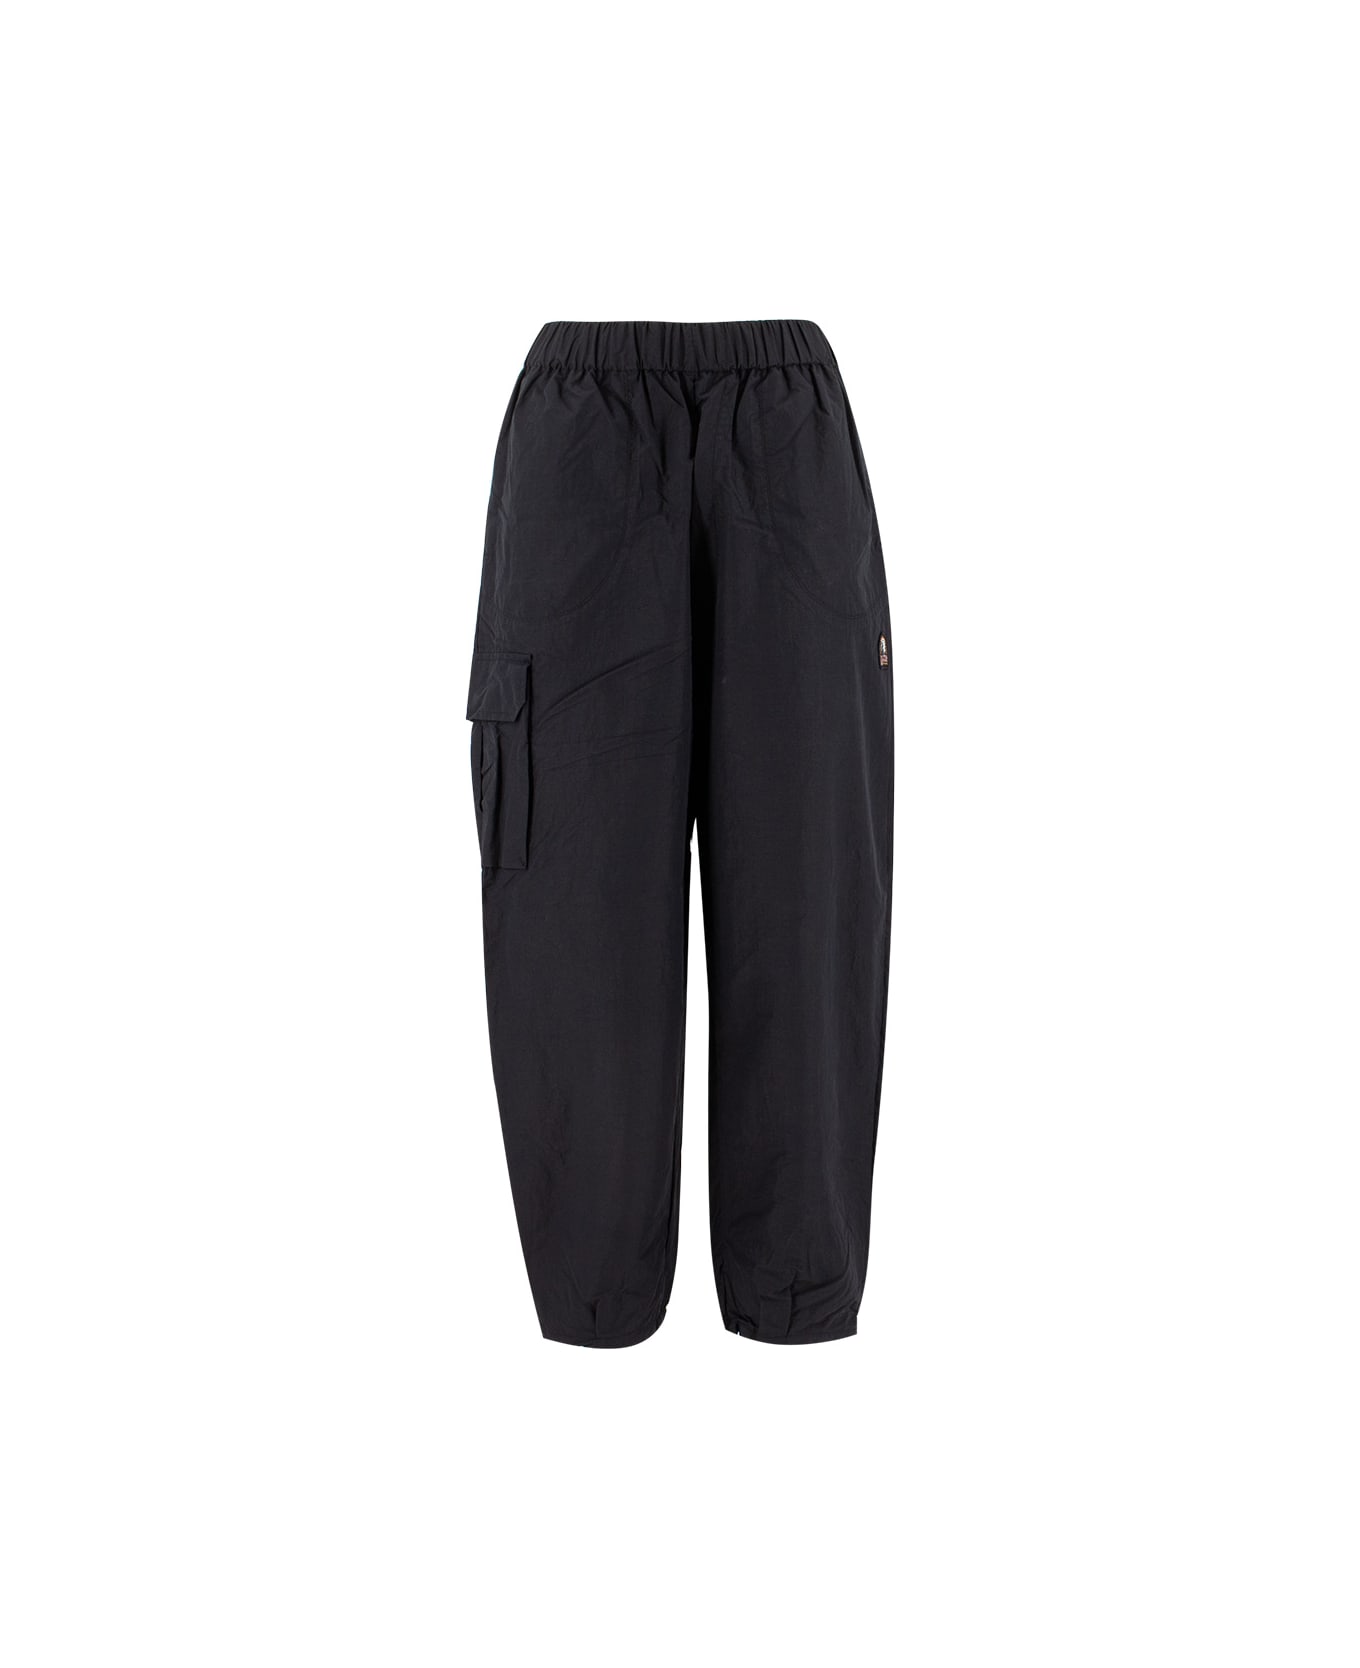 Parajumpers Trousers - BLACK ボトムス